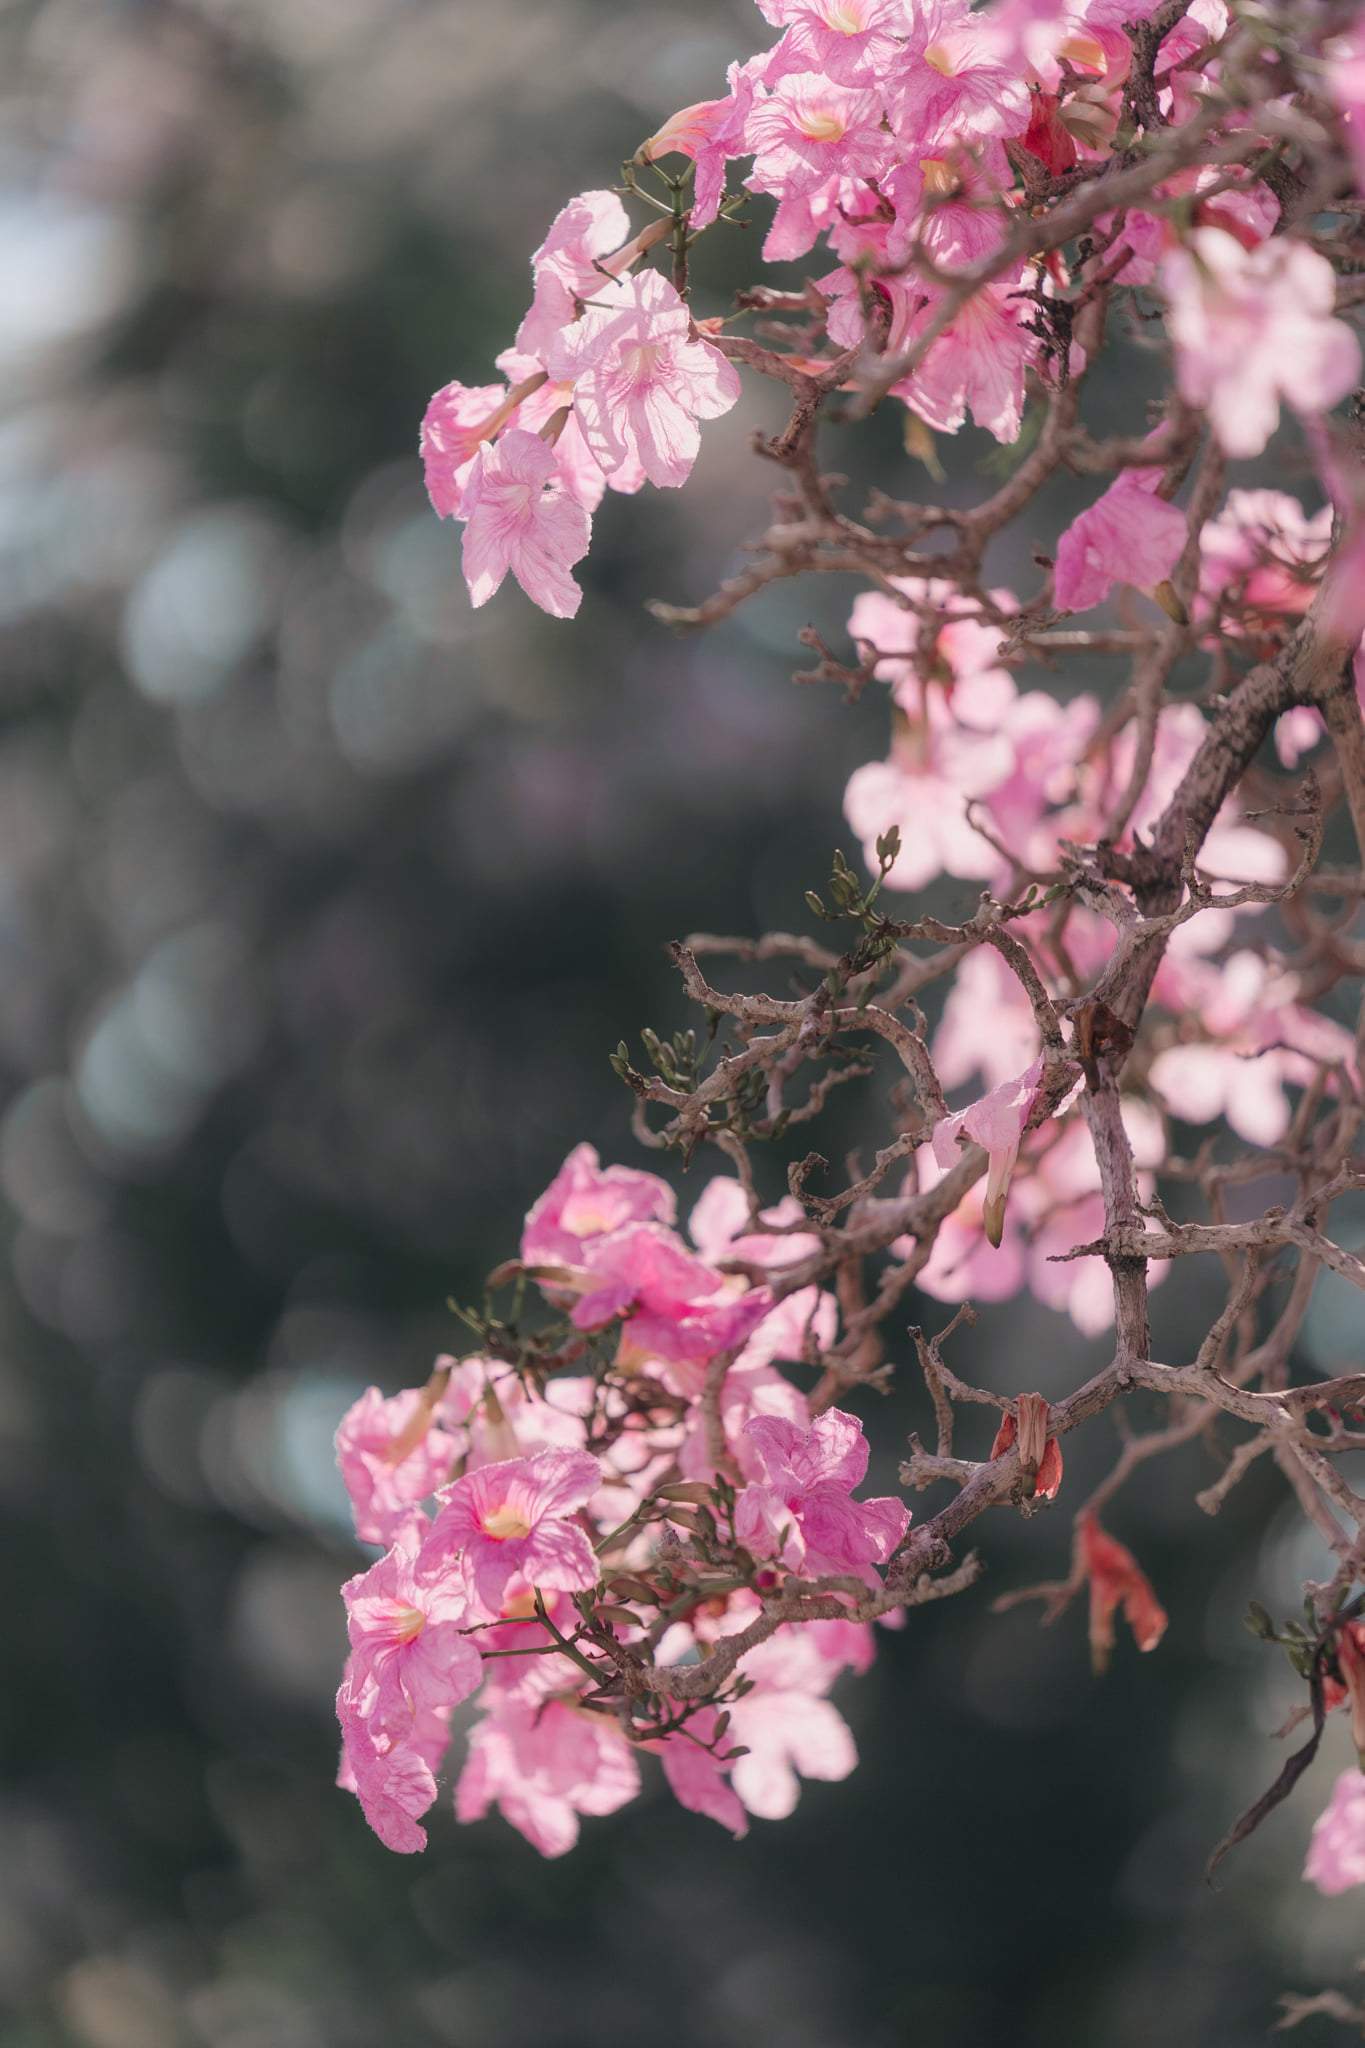 Images of "sakura"-like flowers blooming in malaysia leave netizens amazed